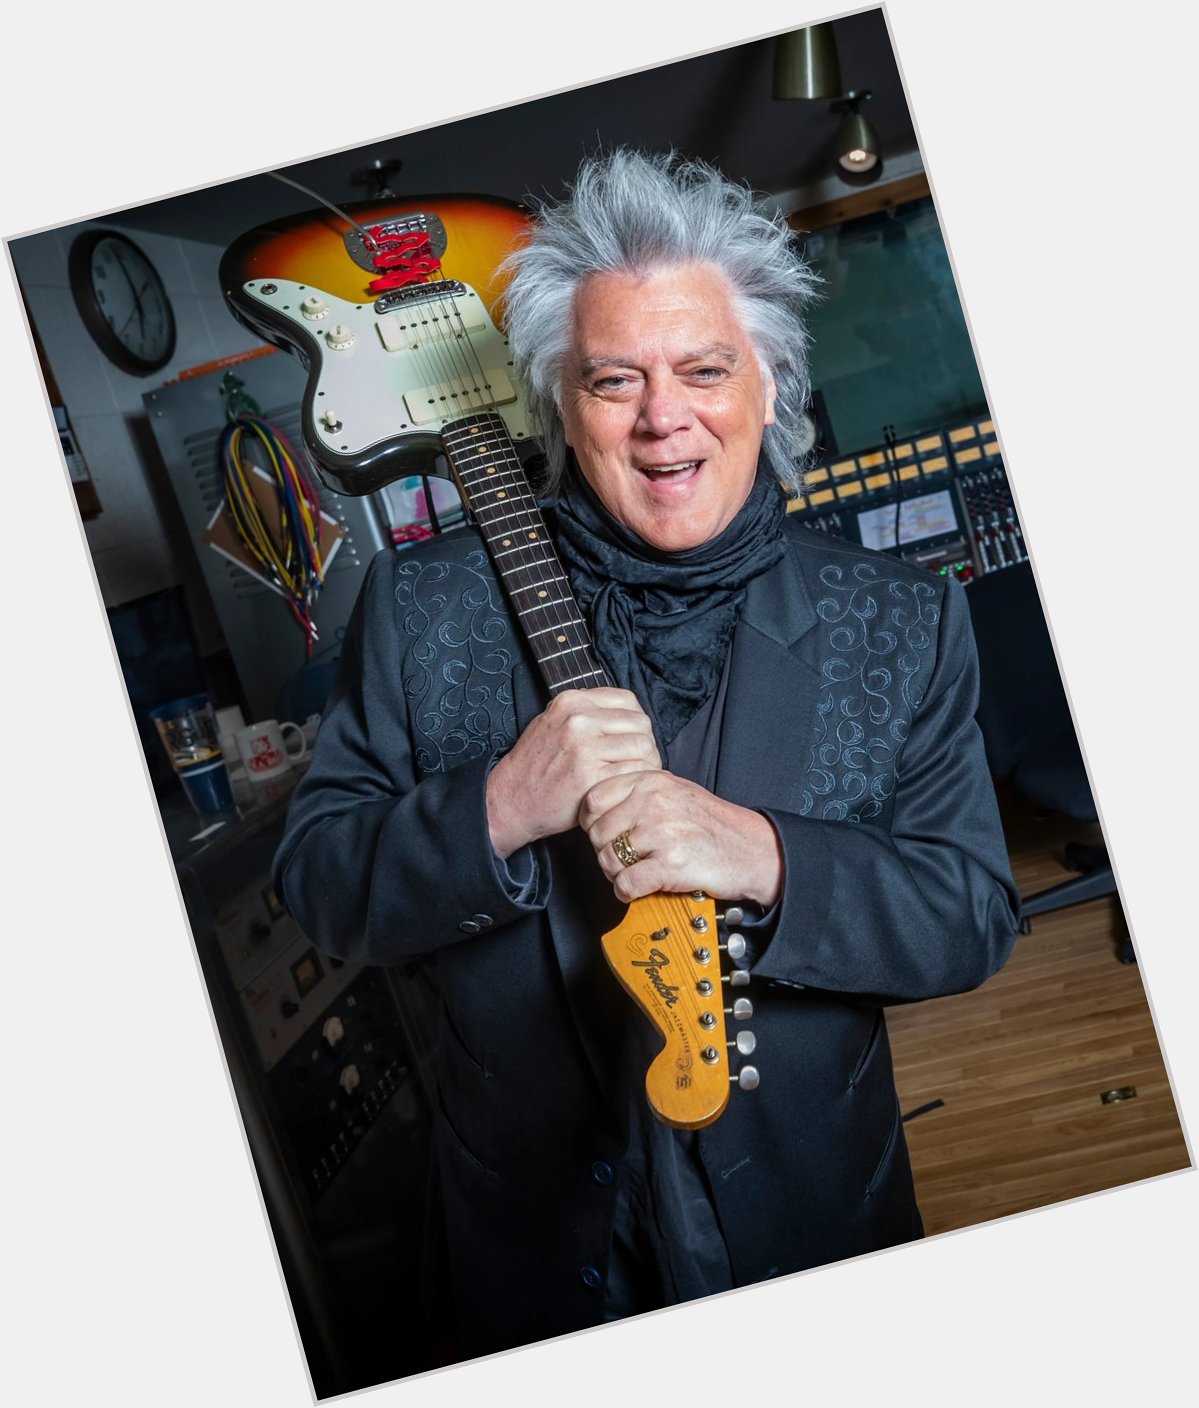 Happy Birthday to Marty Stuart, who was born this day in 1958 